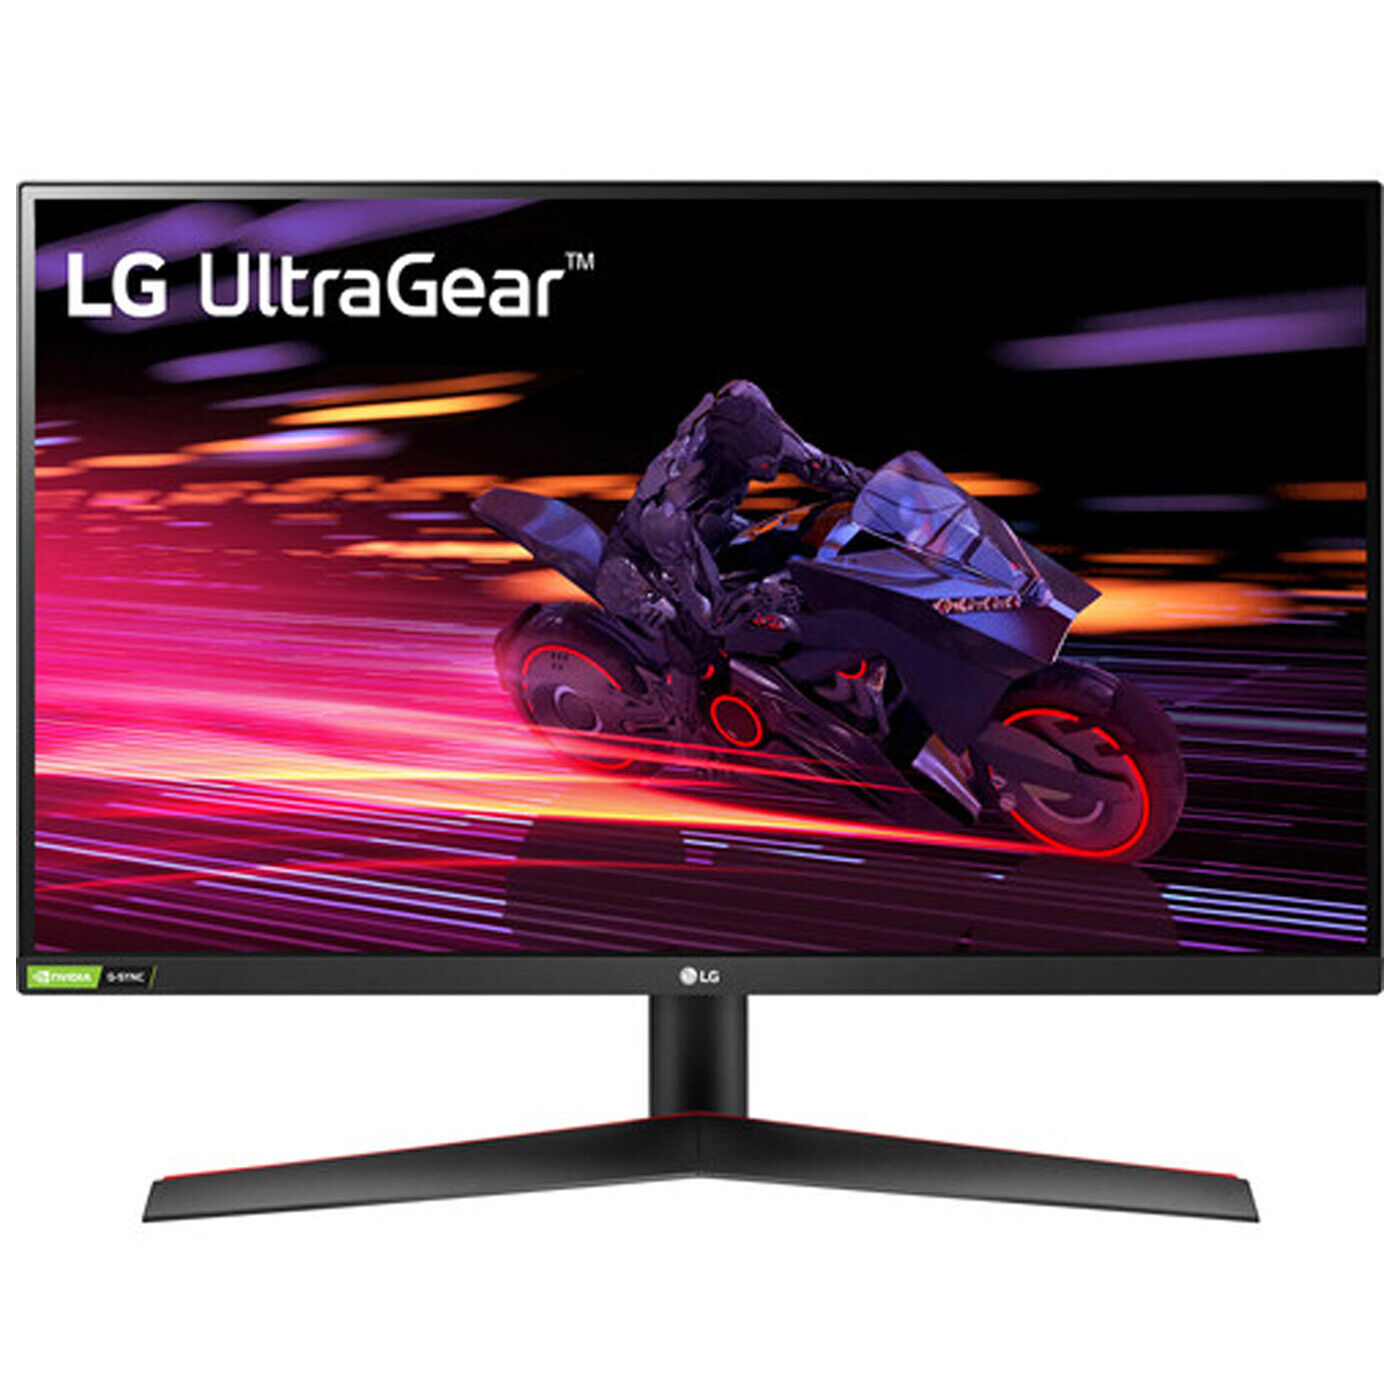 LG 27'' UltraGear FHD IPS 1ms 240Hz HDR Monitor with NVIDIA G-SYNC®